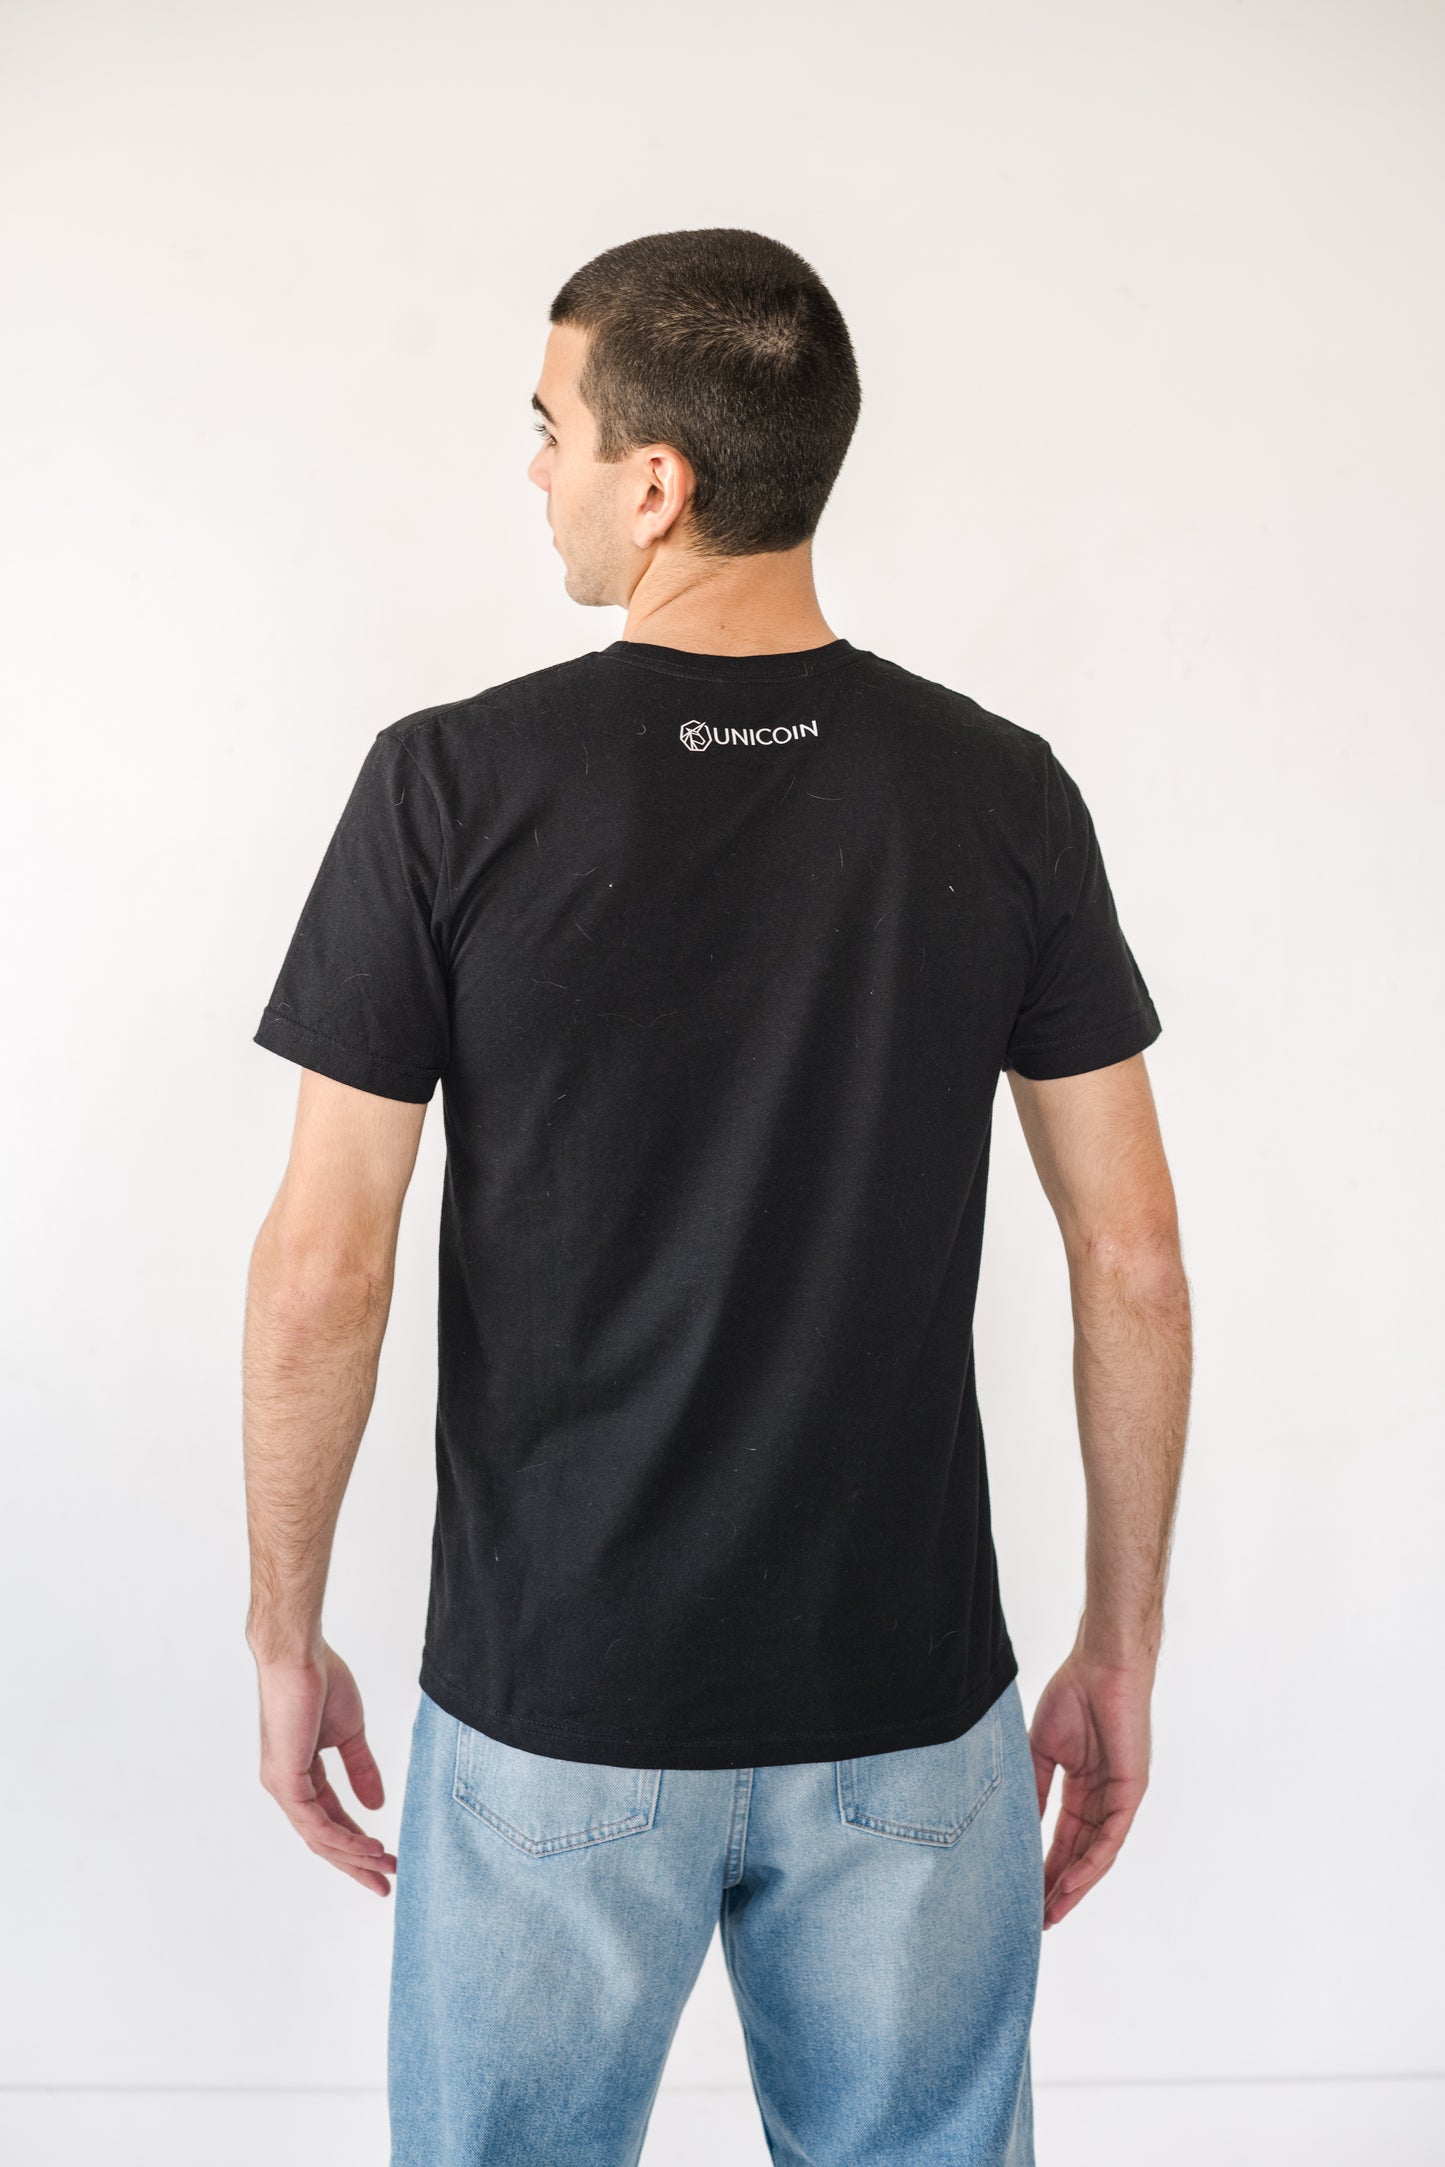 Be Unique, Tshirt for crypto users,  Tshirt for crypto users, Upgrade your wardrobe with our luxurious premium organic cotton tees, crafted for unbeatable comfort and timeless elegance. Made from 100% organic cotton, these short-sleeve tees are machine washable for easy care. Enjoy a soft touch and elevate your everyday style effortlessly.